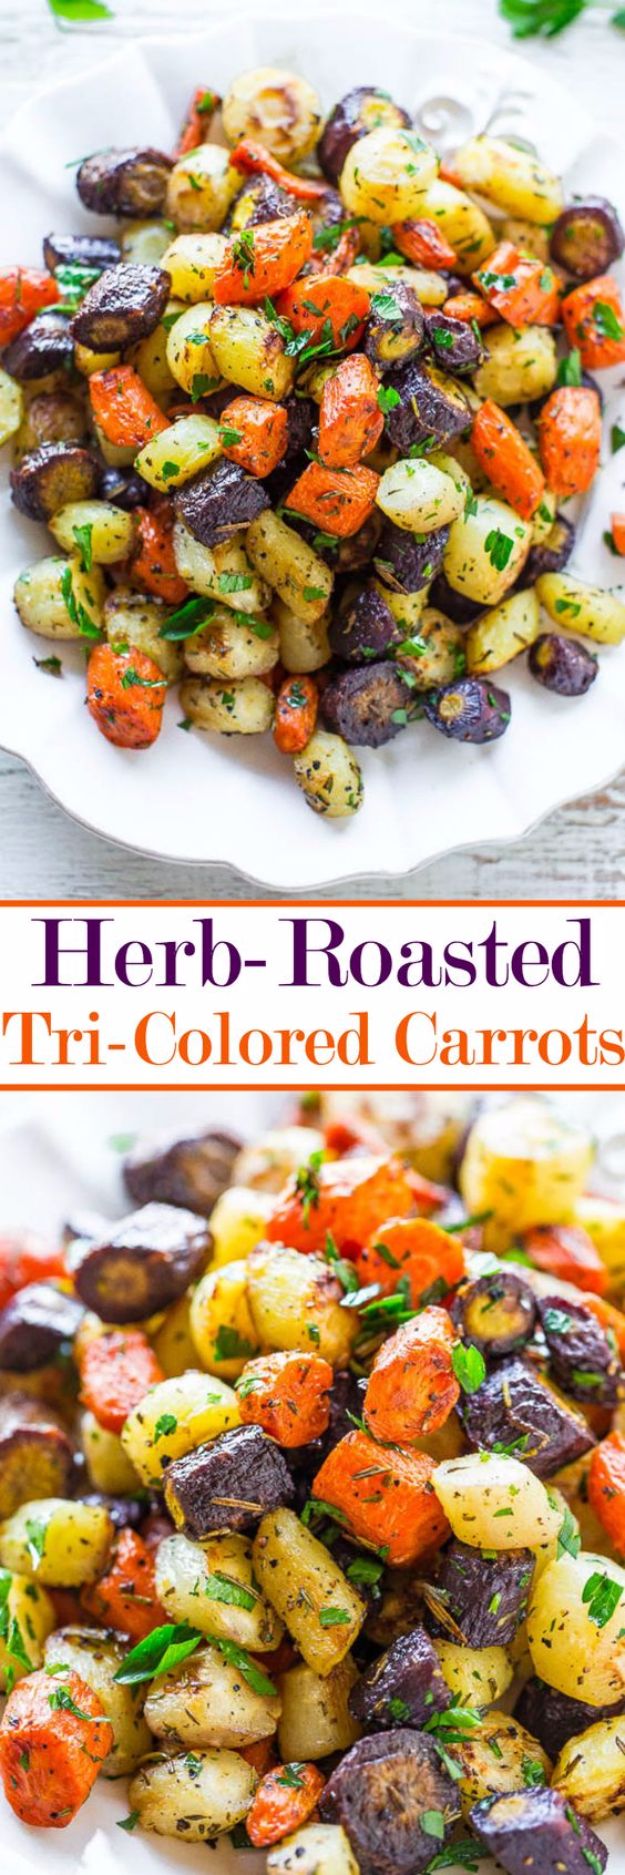 Best Easter Dinner Recipes - Herb Roasted Tri Colored Carrots - Easy Recipe Ideas for Easter Dinners and Holiday Meals for Families - Side Dishes, Slow Cooker Recipe Tutorials, Main Courses, Traditional Meat, Vegetable and Dessert Ideas - Desserts, Pies, Cakes, Ham and Beef, Lamb - DIY Projects and Crafts by DIY JOY 